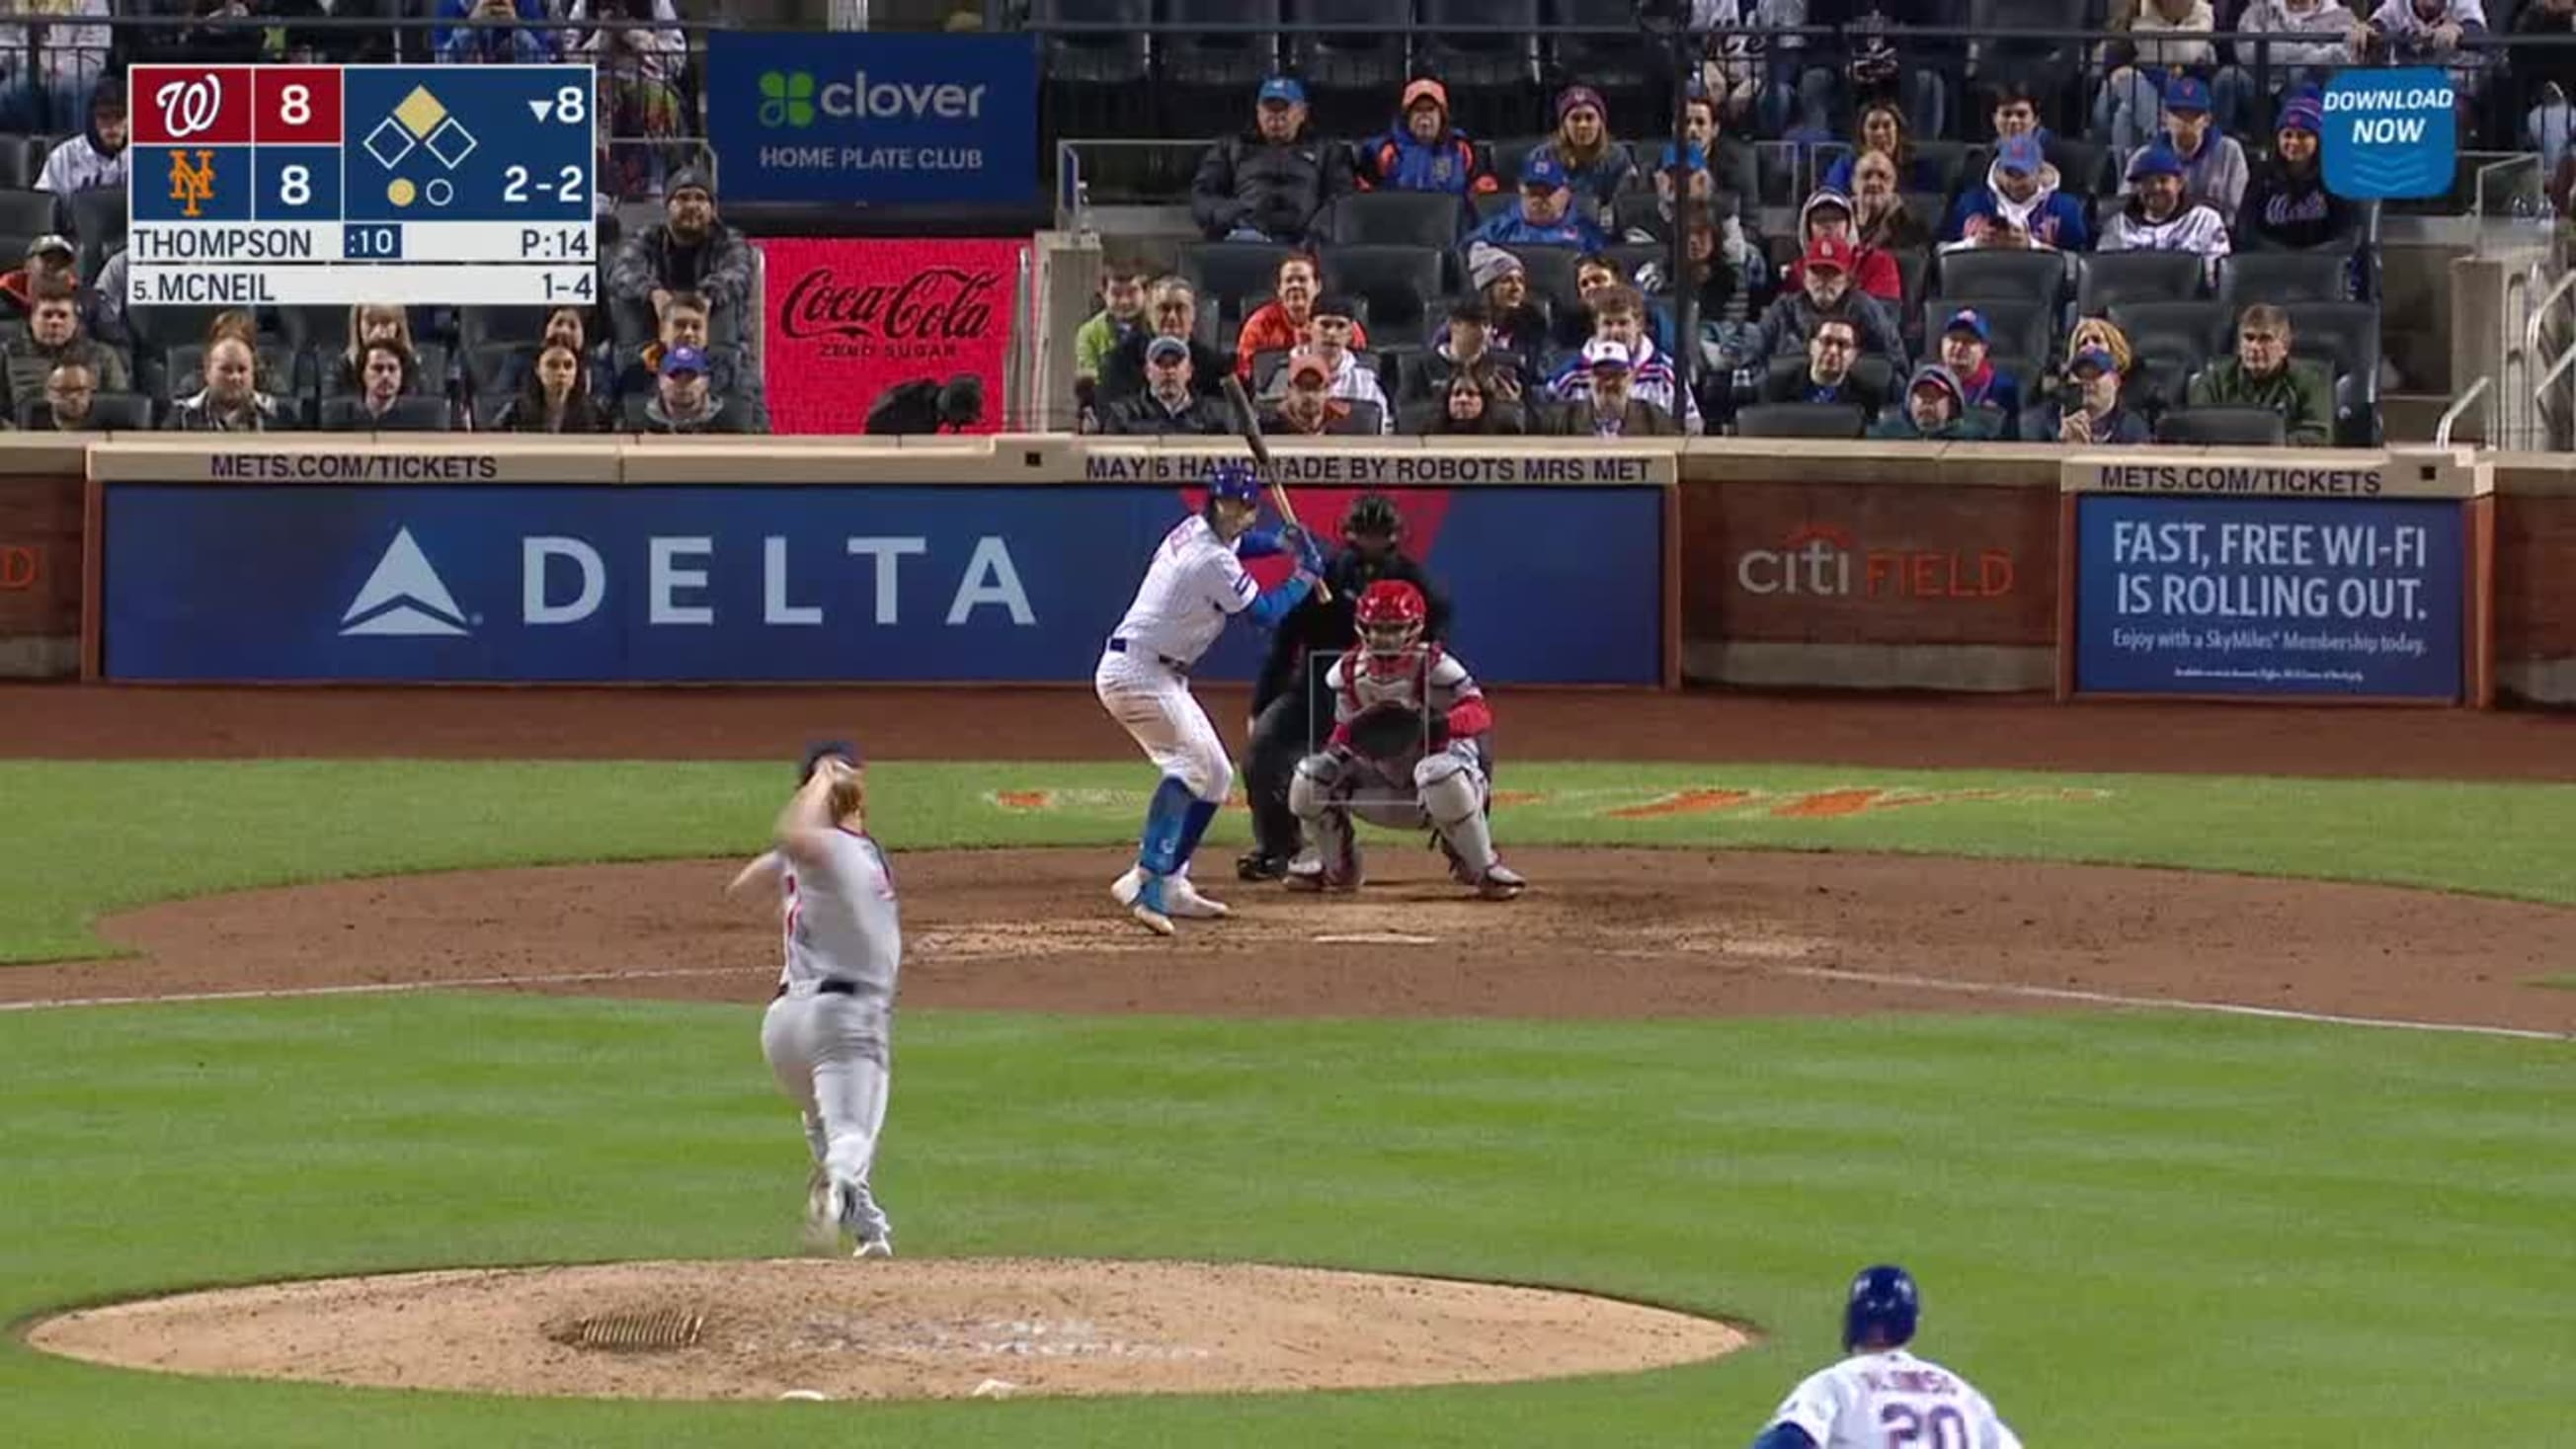 Jeff McNeil's 4 RBI and home run fuel Mets' 7-1 victory - Jeff